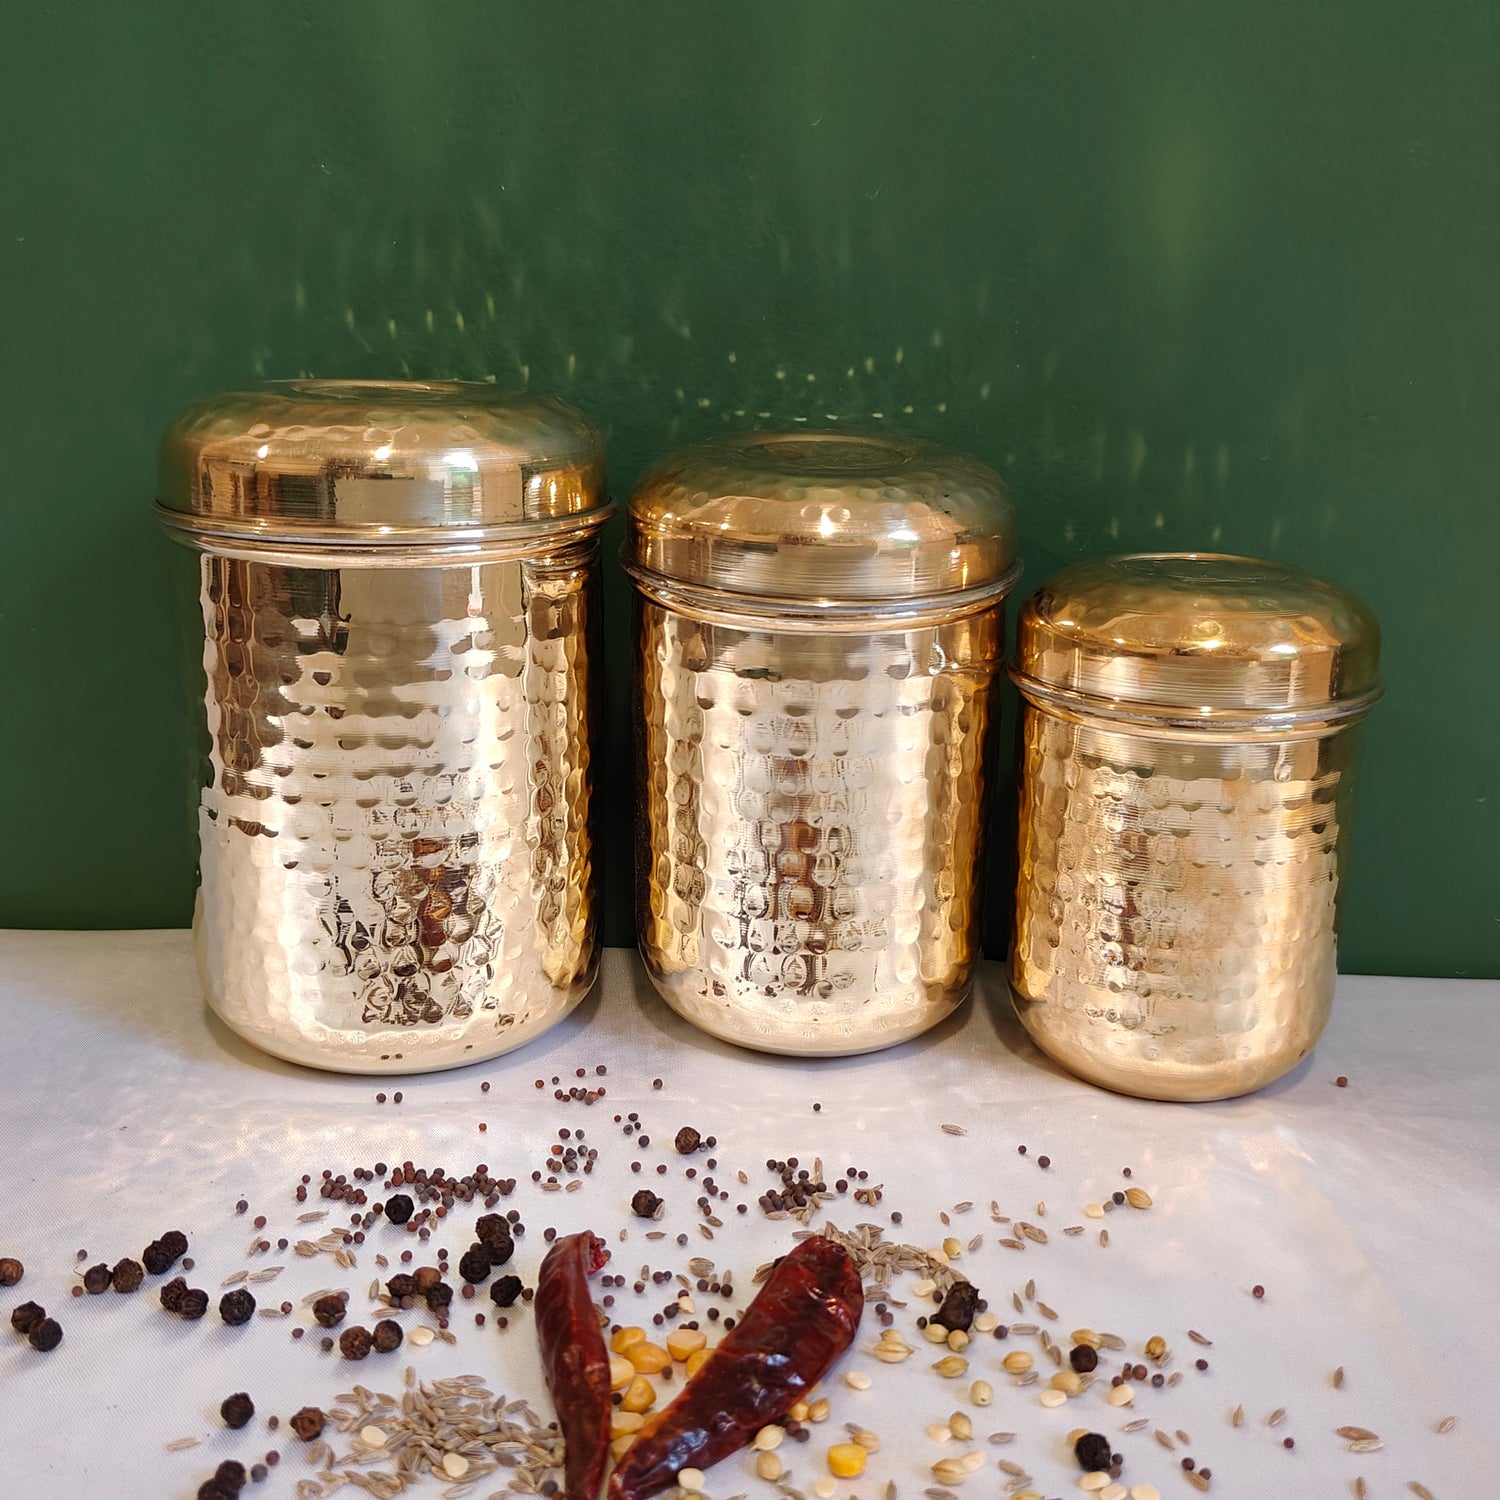 Storing Your Spices In Plastic Containers Will Ruin Their Shelf Life